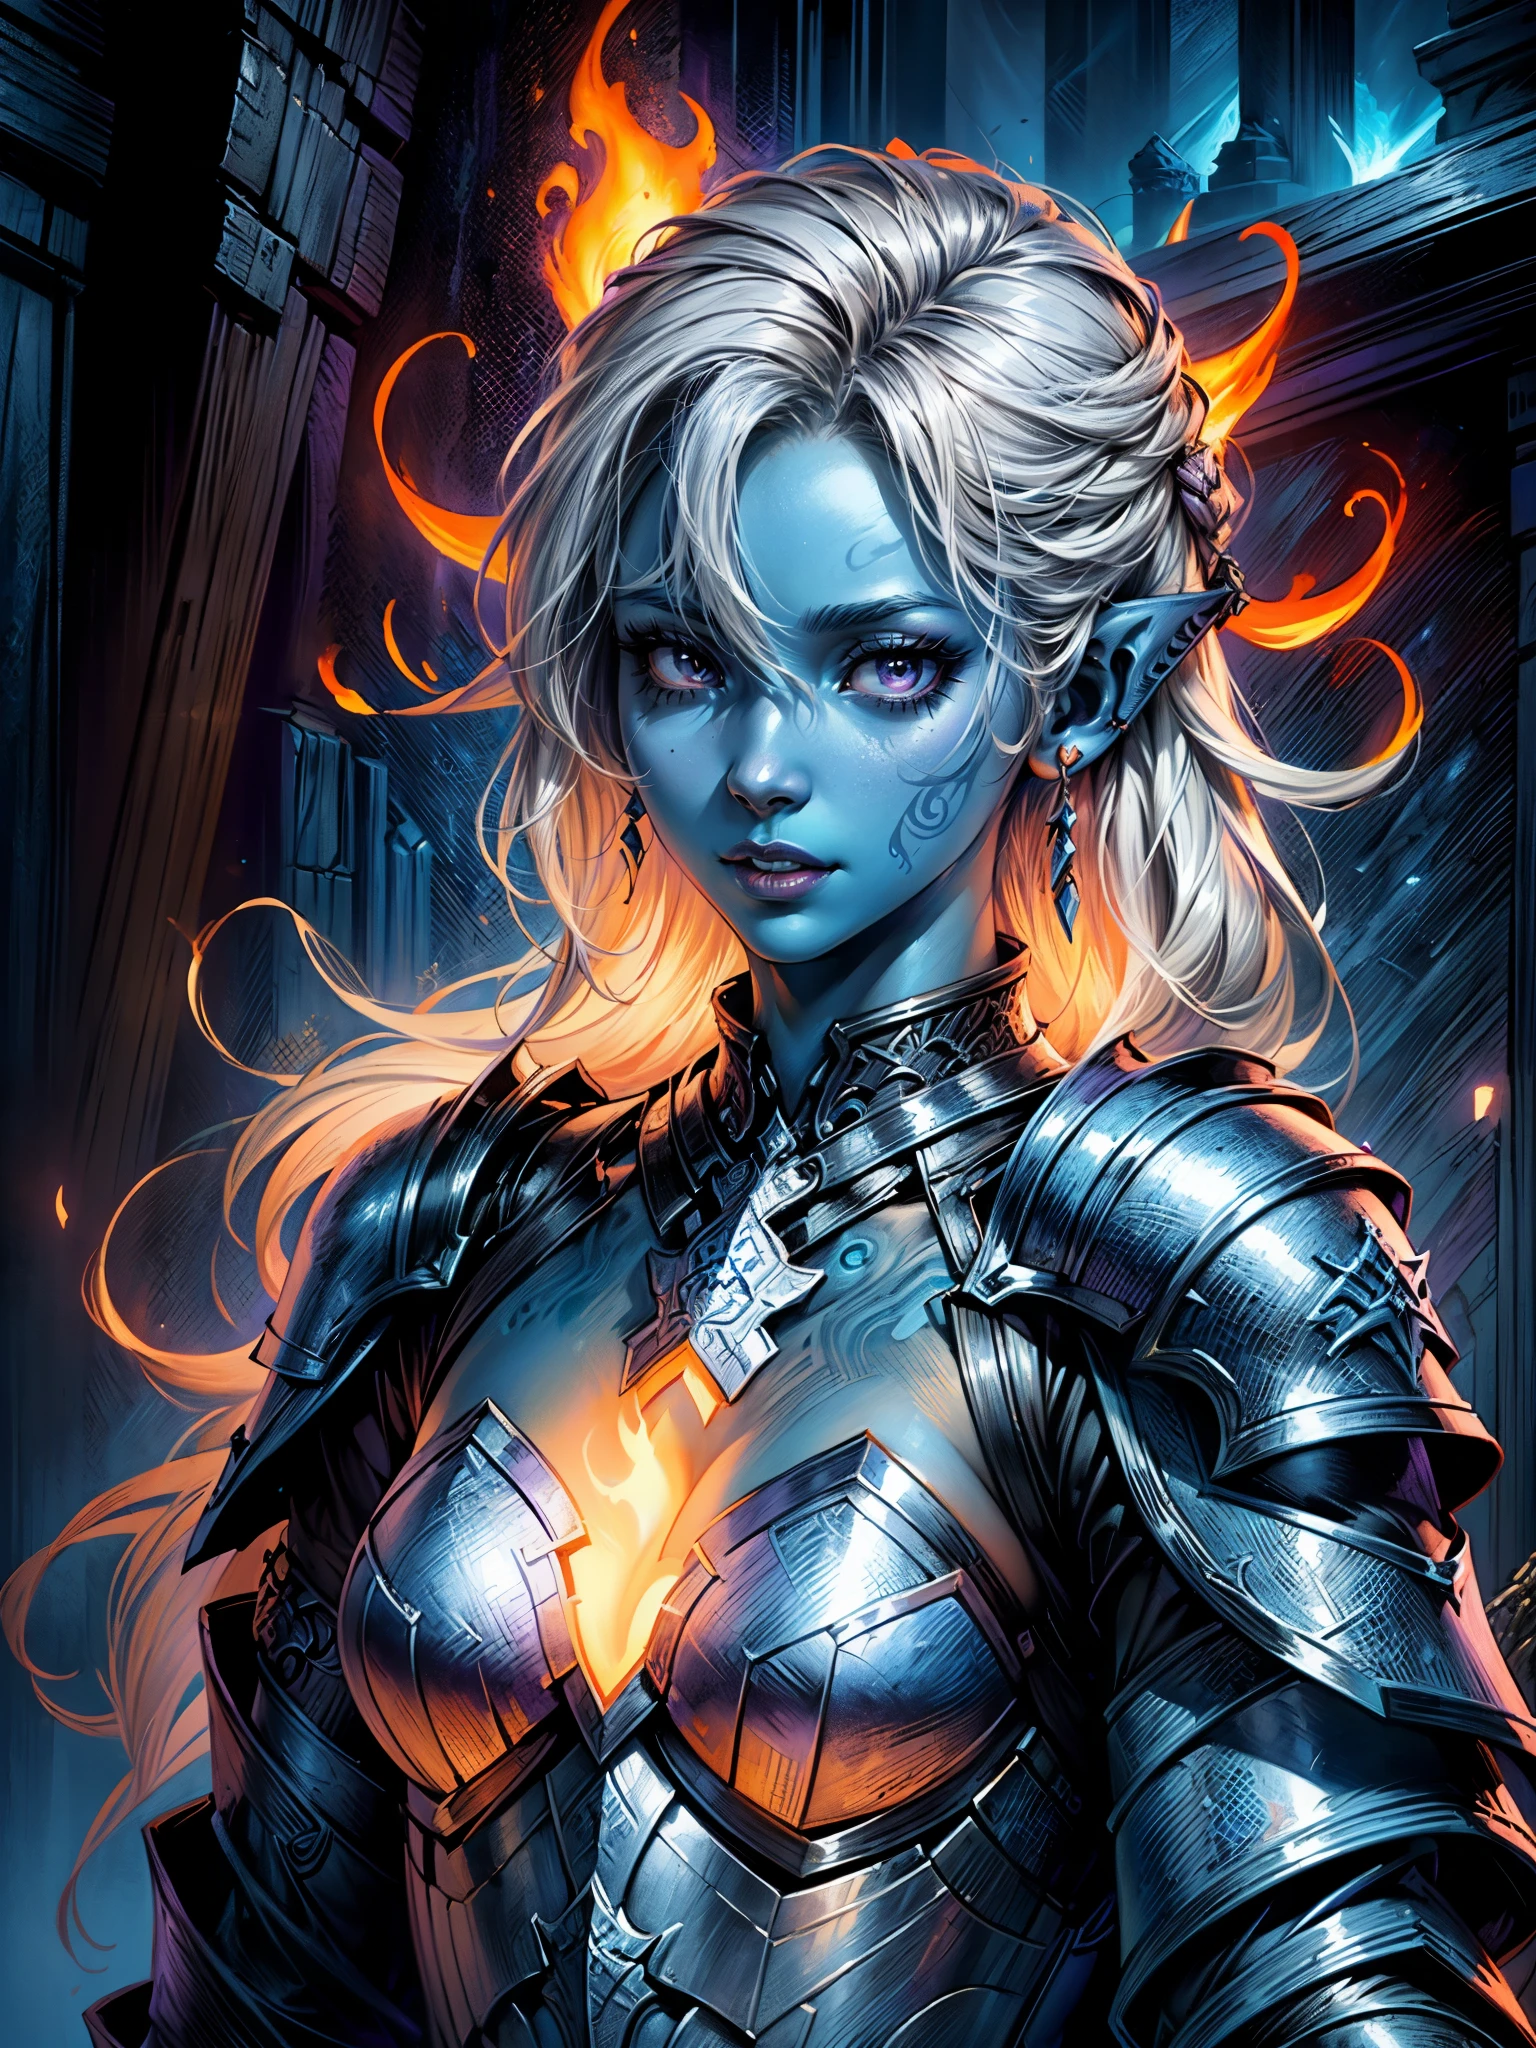 fantasy art, dnd art, RPG art, wide shot, (masterpiece: 1.4) a (portrait: 1.3) intense details, highly detailed, photorealistic, best quality, highres, portrait a female (fantasy art, Masterpiece, best quality: 1.3) ((blue skin: 1.5)), intense details facial details, exquisite beauty, (fantasy art, Masterpiece, best quality) cleric, (blue: 1.3) skinned female, (white hair: 1.4), long hair, (hair hides ears: 1.5), (purple eyes: 1.3), action shot fantasy art, Masterpiece, best quality) armed a fiery sword red fire, wearing heavy (white: 1.3) half plate mail armor, wearing high heeled laced boots, wearing an(orange :1.3) cloak, wearing glowing holy symbol GlowingRunes_yellow, within fantasy temple background, reflection light, high details, best quality, 16k, [ultra detailed], masterpiece, best quality, (extremely detailed), close up, ultra wide shot, photorealistic, RAW, fantasy art, dnd art, fantasy art, realistic art,((best quality)), ((masterpiece)), (detailed), perfect face,